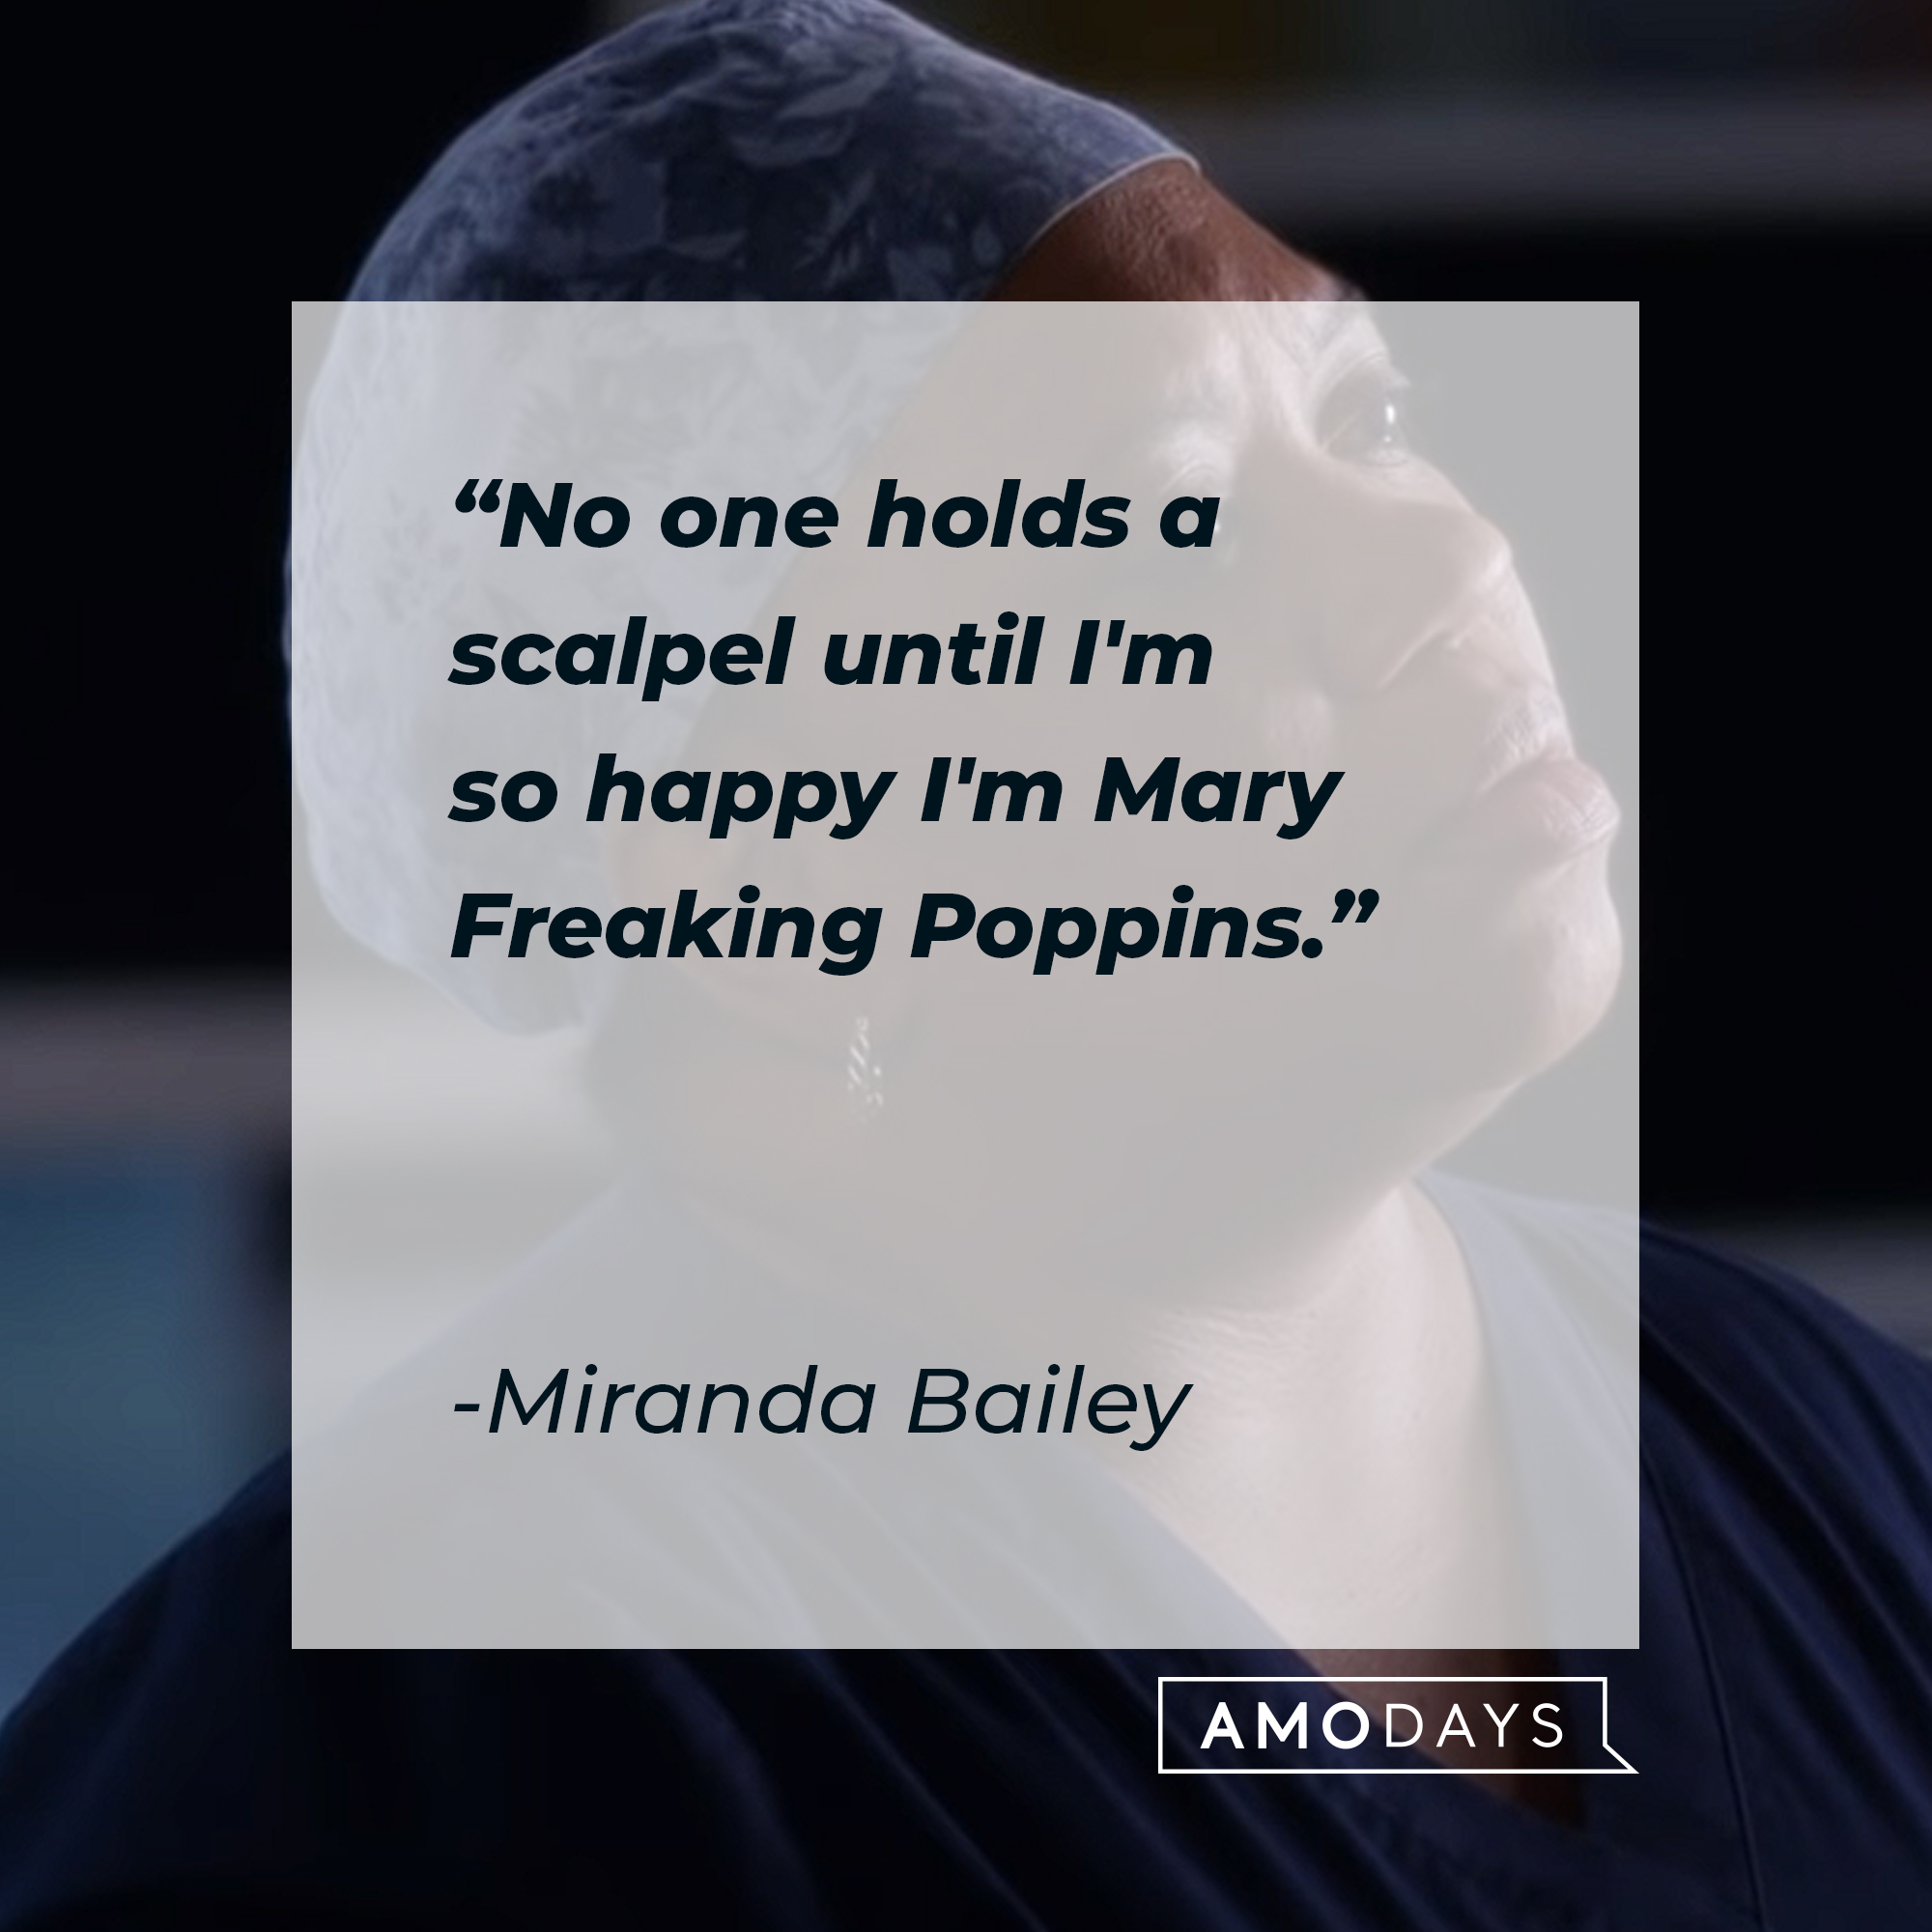 Miranda Bailey's quote: "No one holds a scalpel until I'm so happy I'm Mary Freaking Poppins." | Source: youtube.com/ABCNetwork